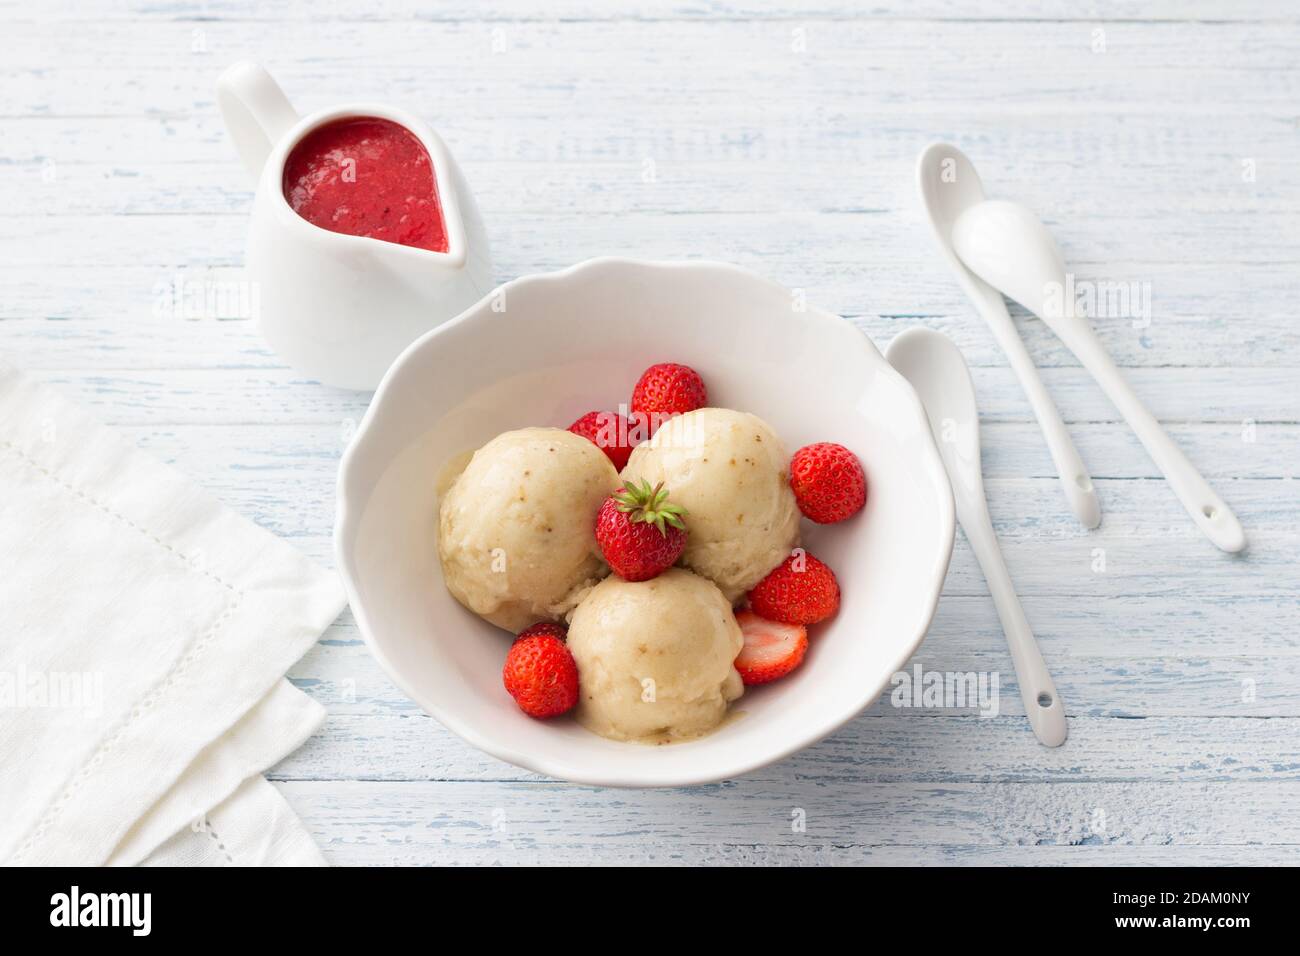 Vegan banana ice cream with strawberry sauce and fresh strawberries in a white bowl on a light blue wooden background Stock Photo